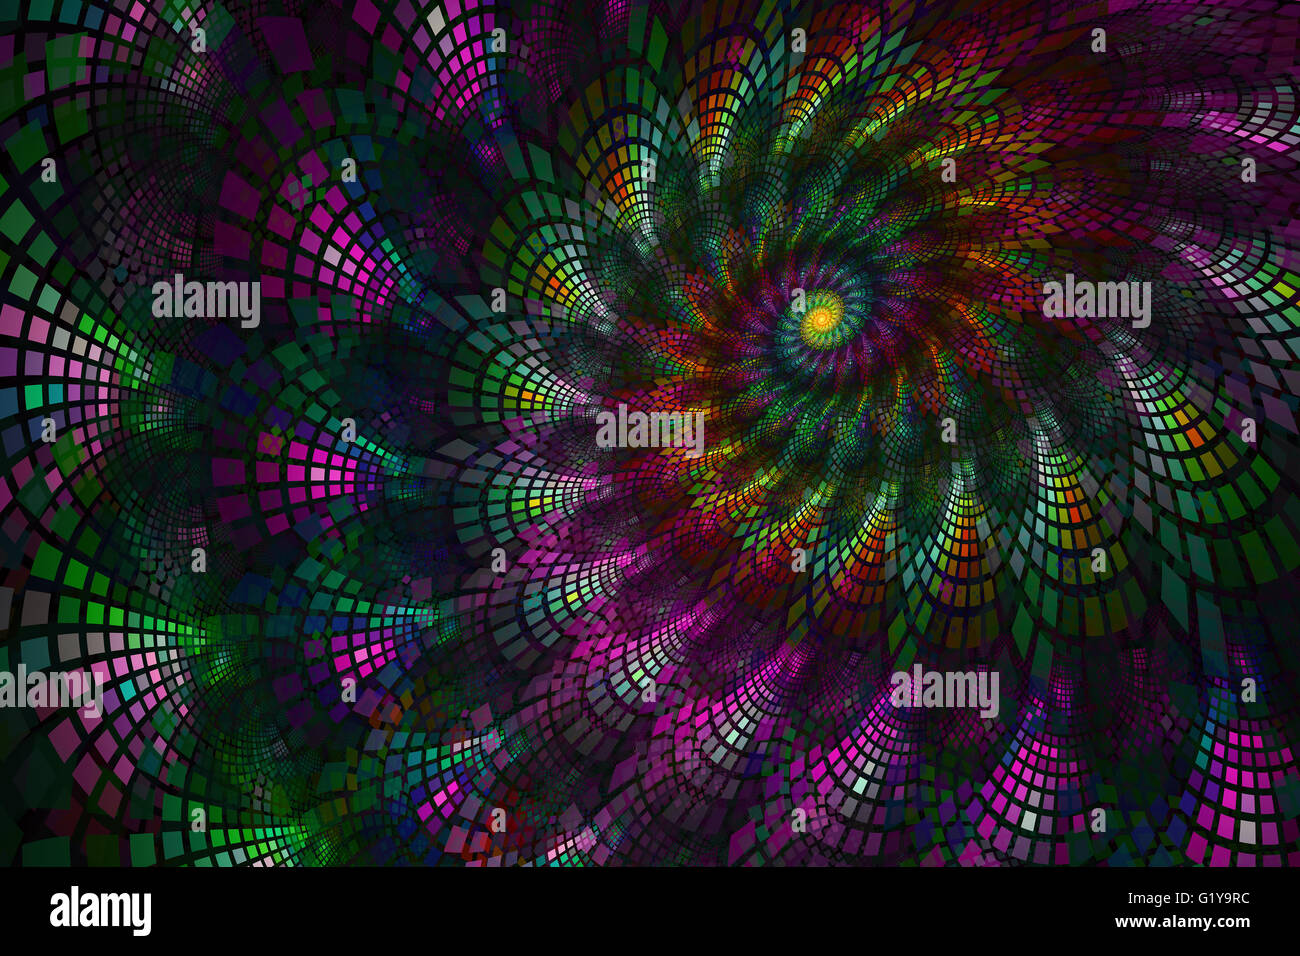 Abstract fractal swirl with colorful tiles in gradients Stock Photo